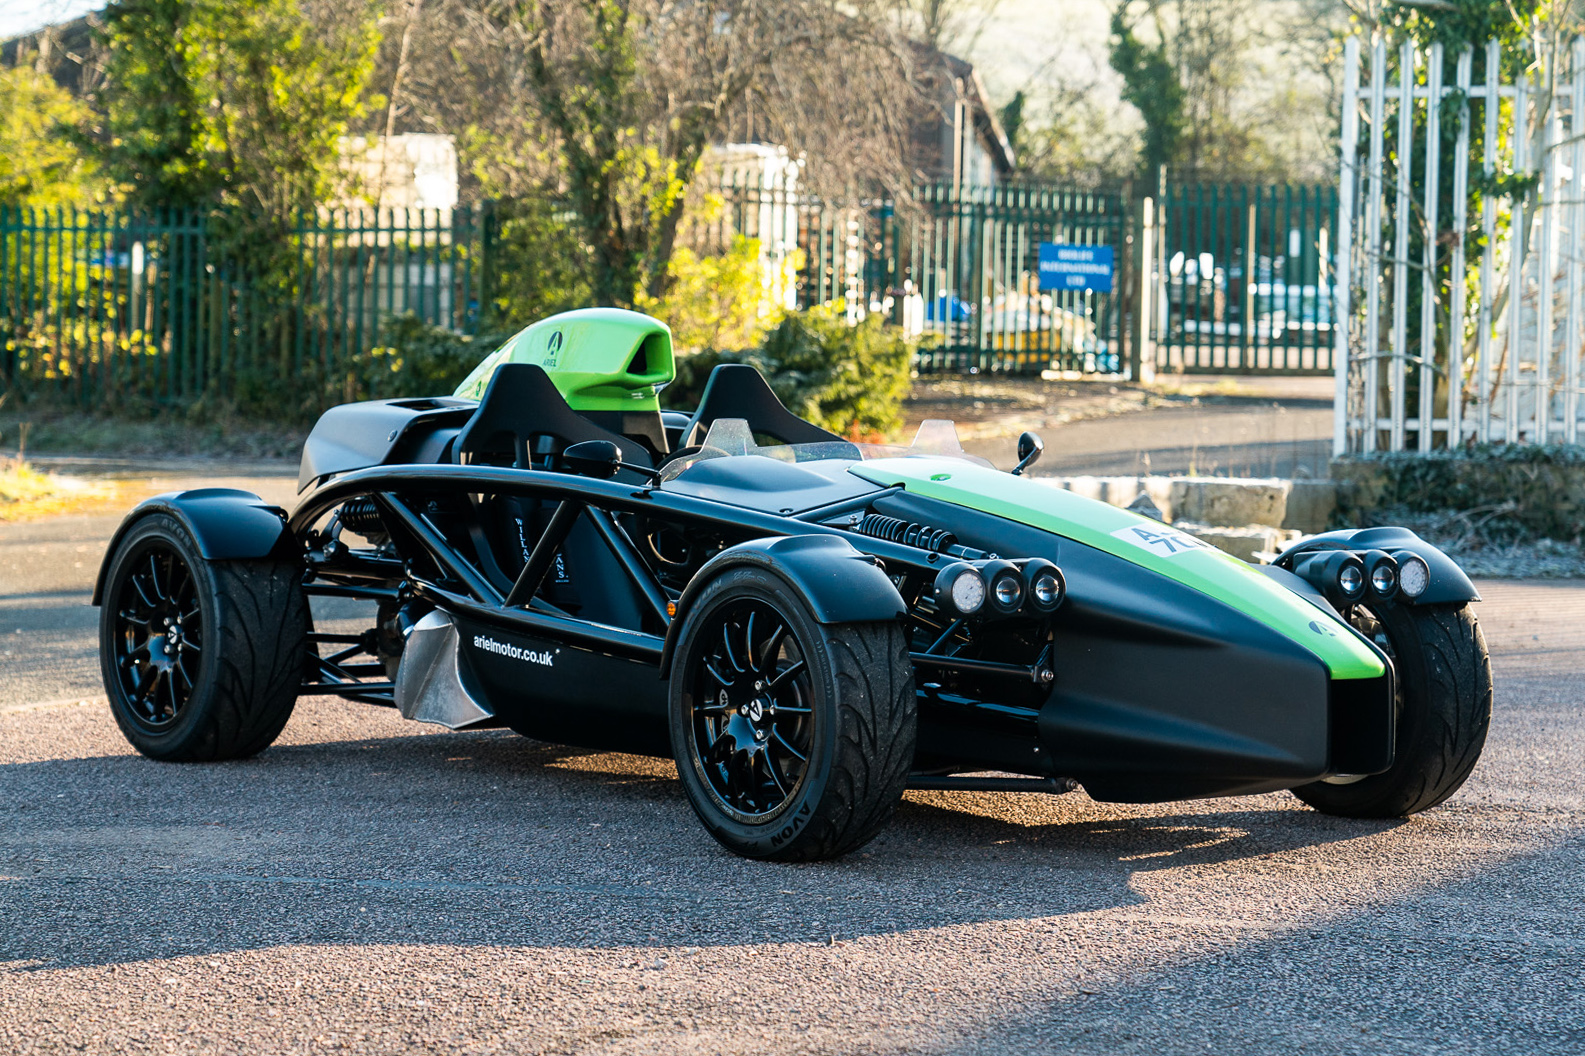 2019 Ariel Atom 4 for sale by auction in Brailes, United Kingdom